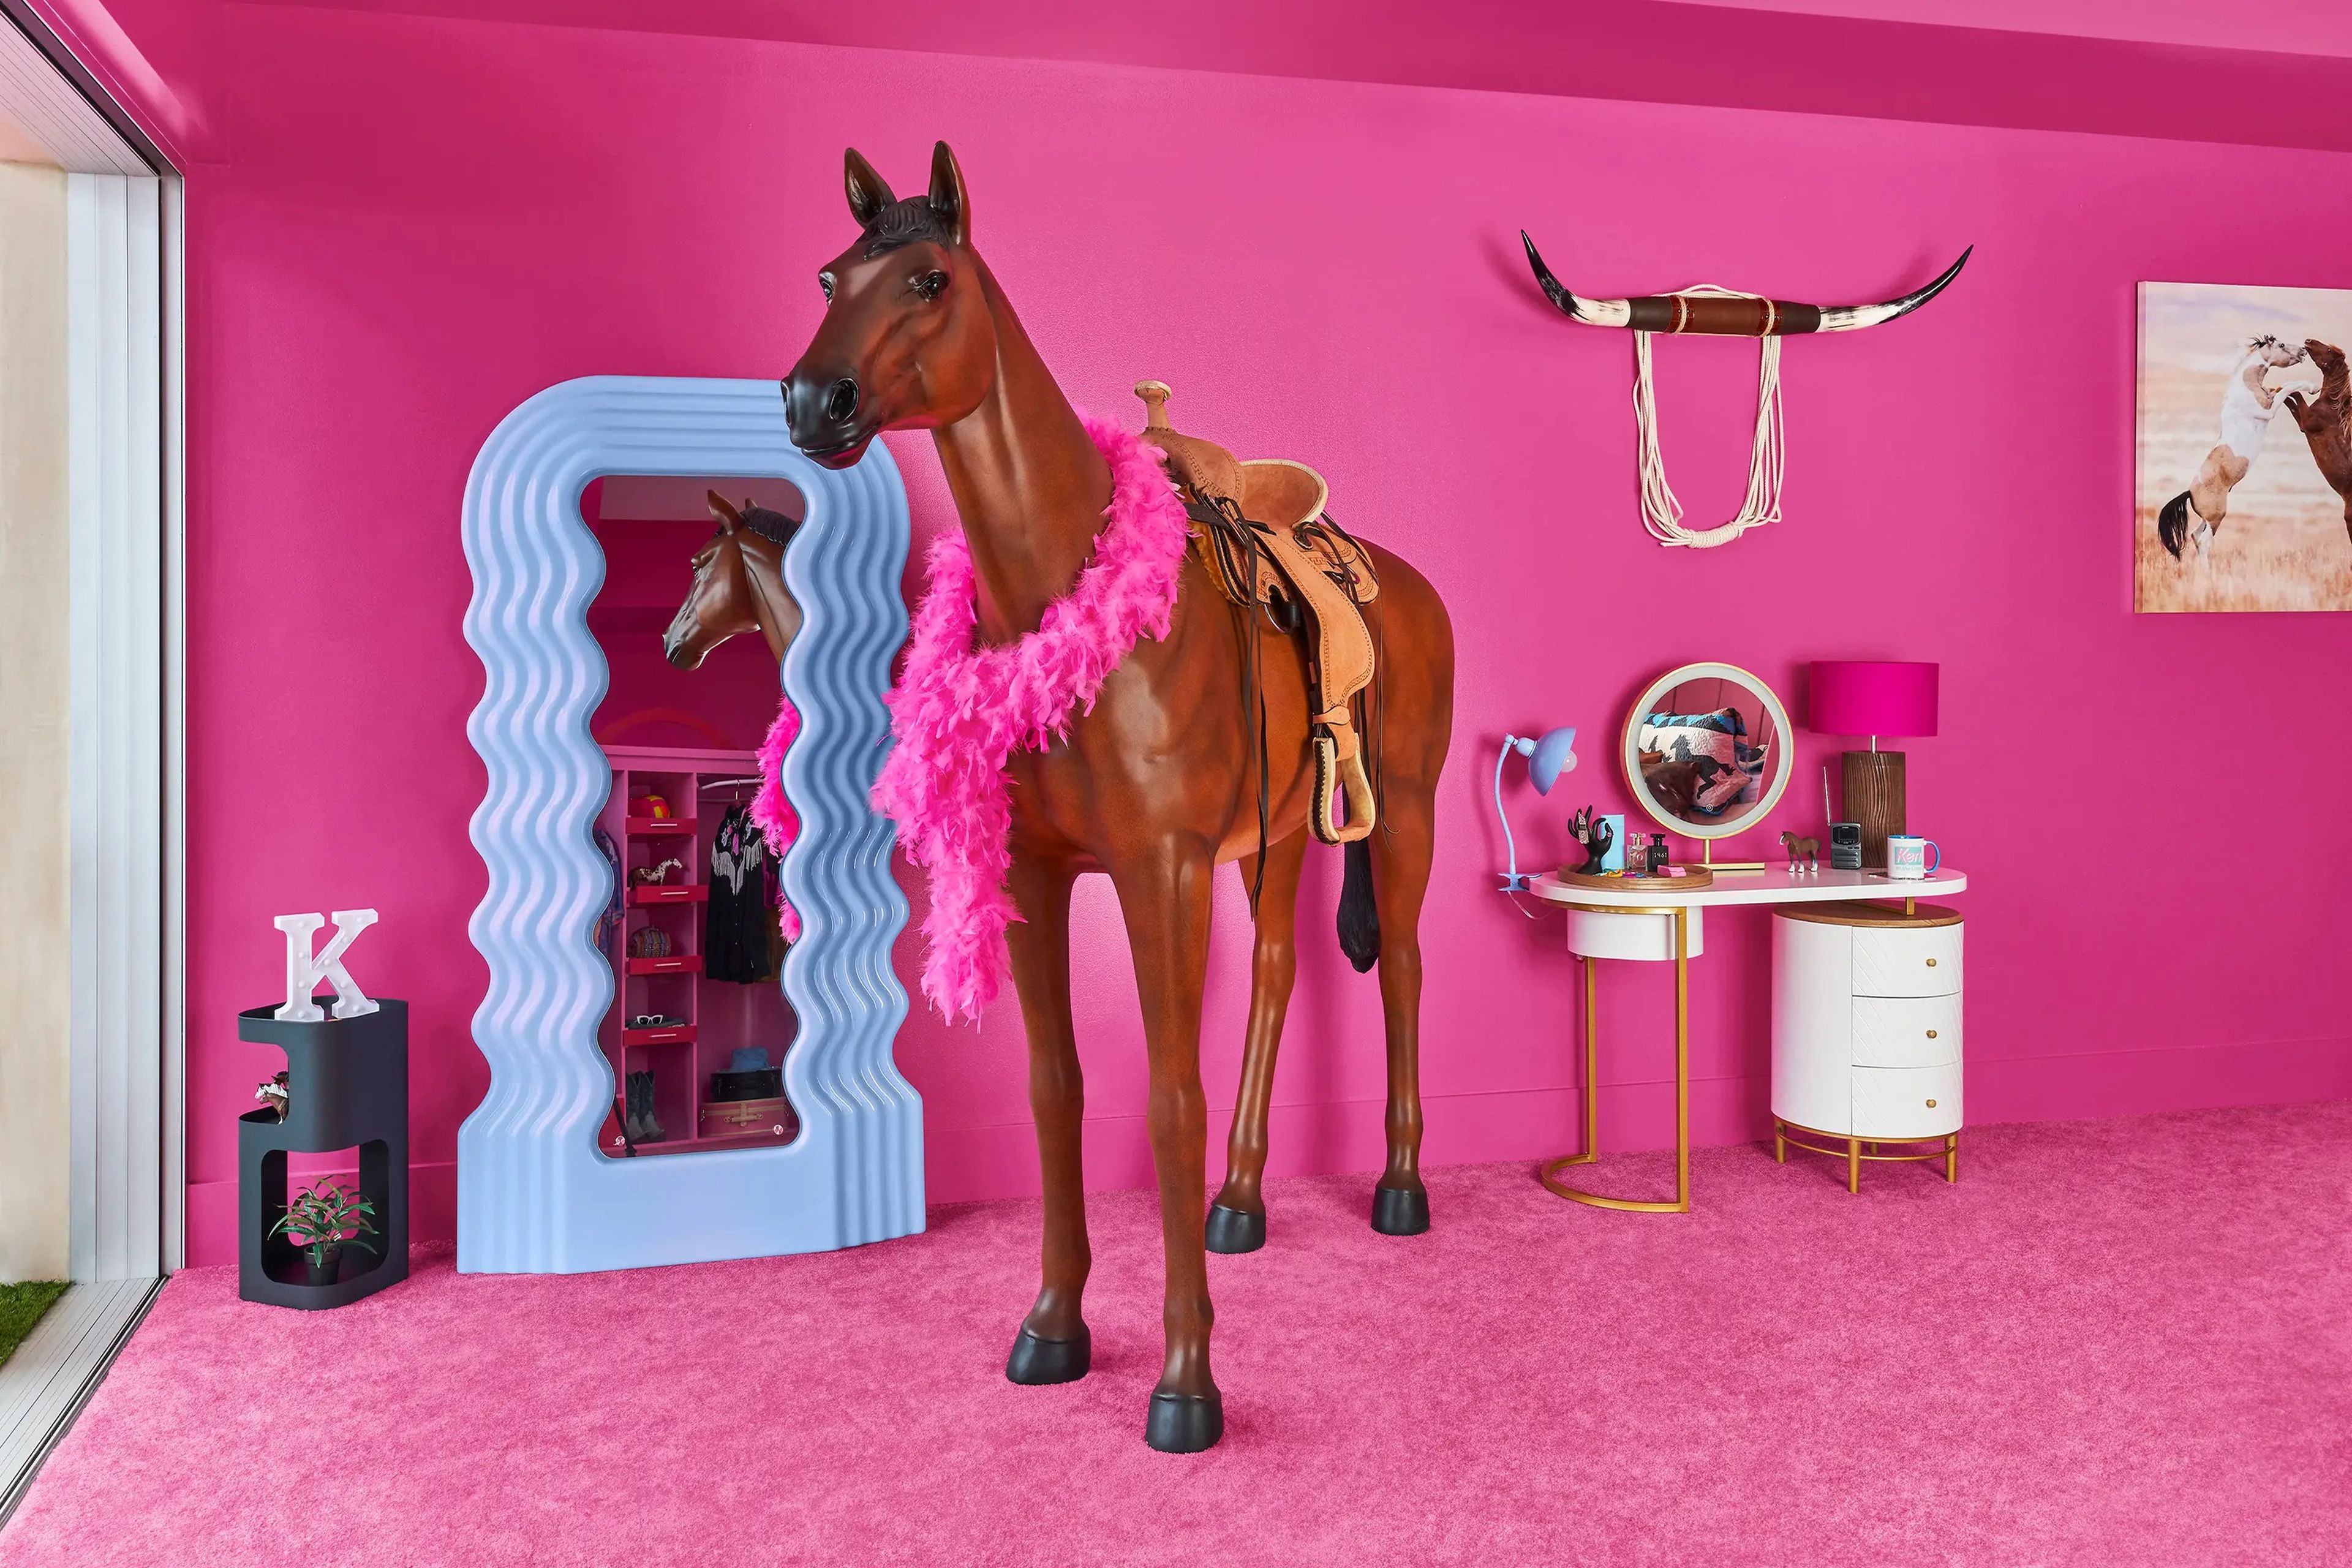 A life-sized horse display in the closet.